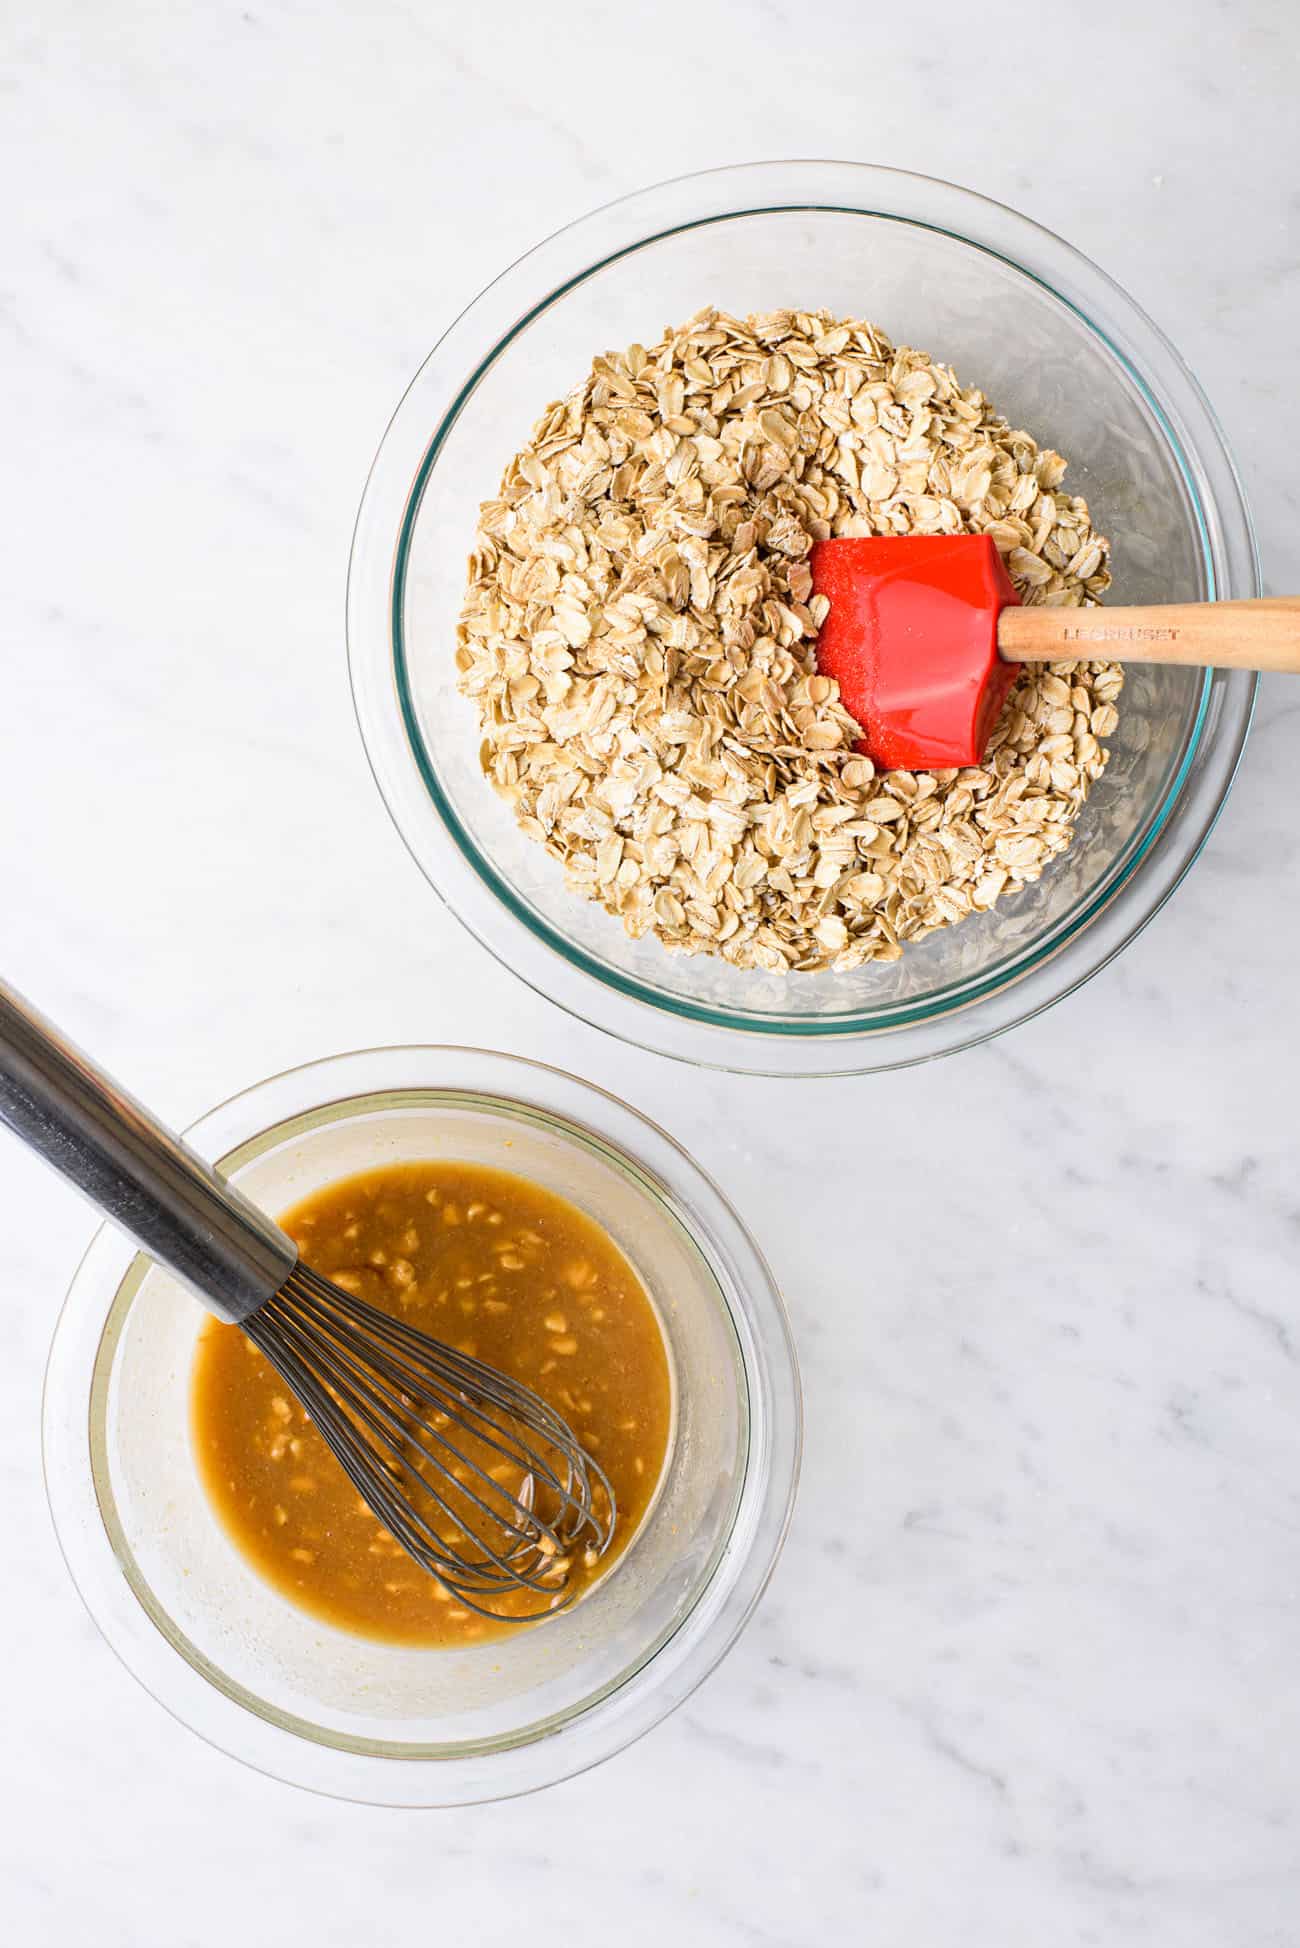 The process of making a peanut butter granola recipe: two bowls, one filled with rolled oats and the other with a mixture of peanut nutter, maple syrup, and coconut oil